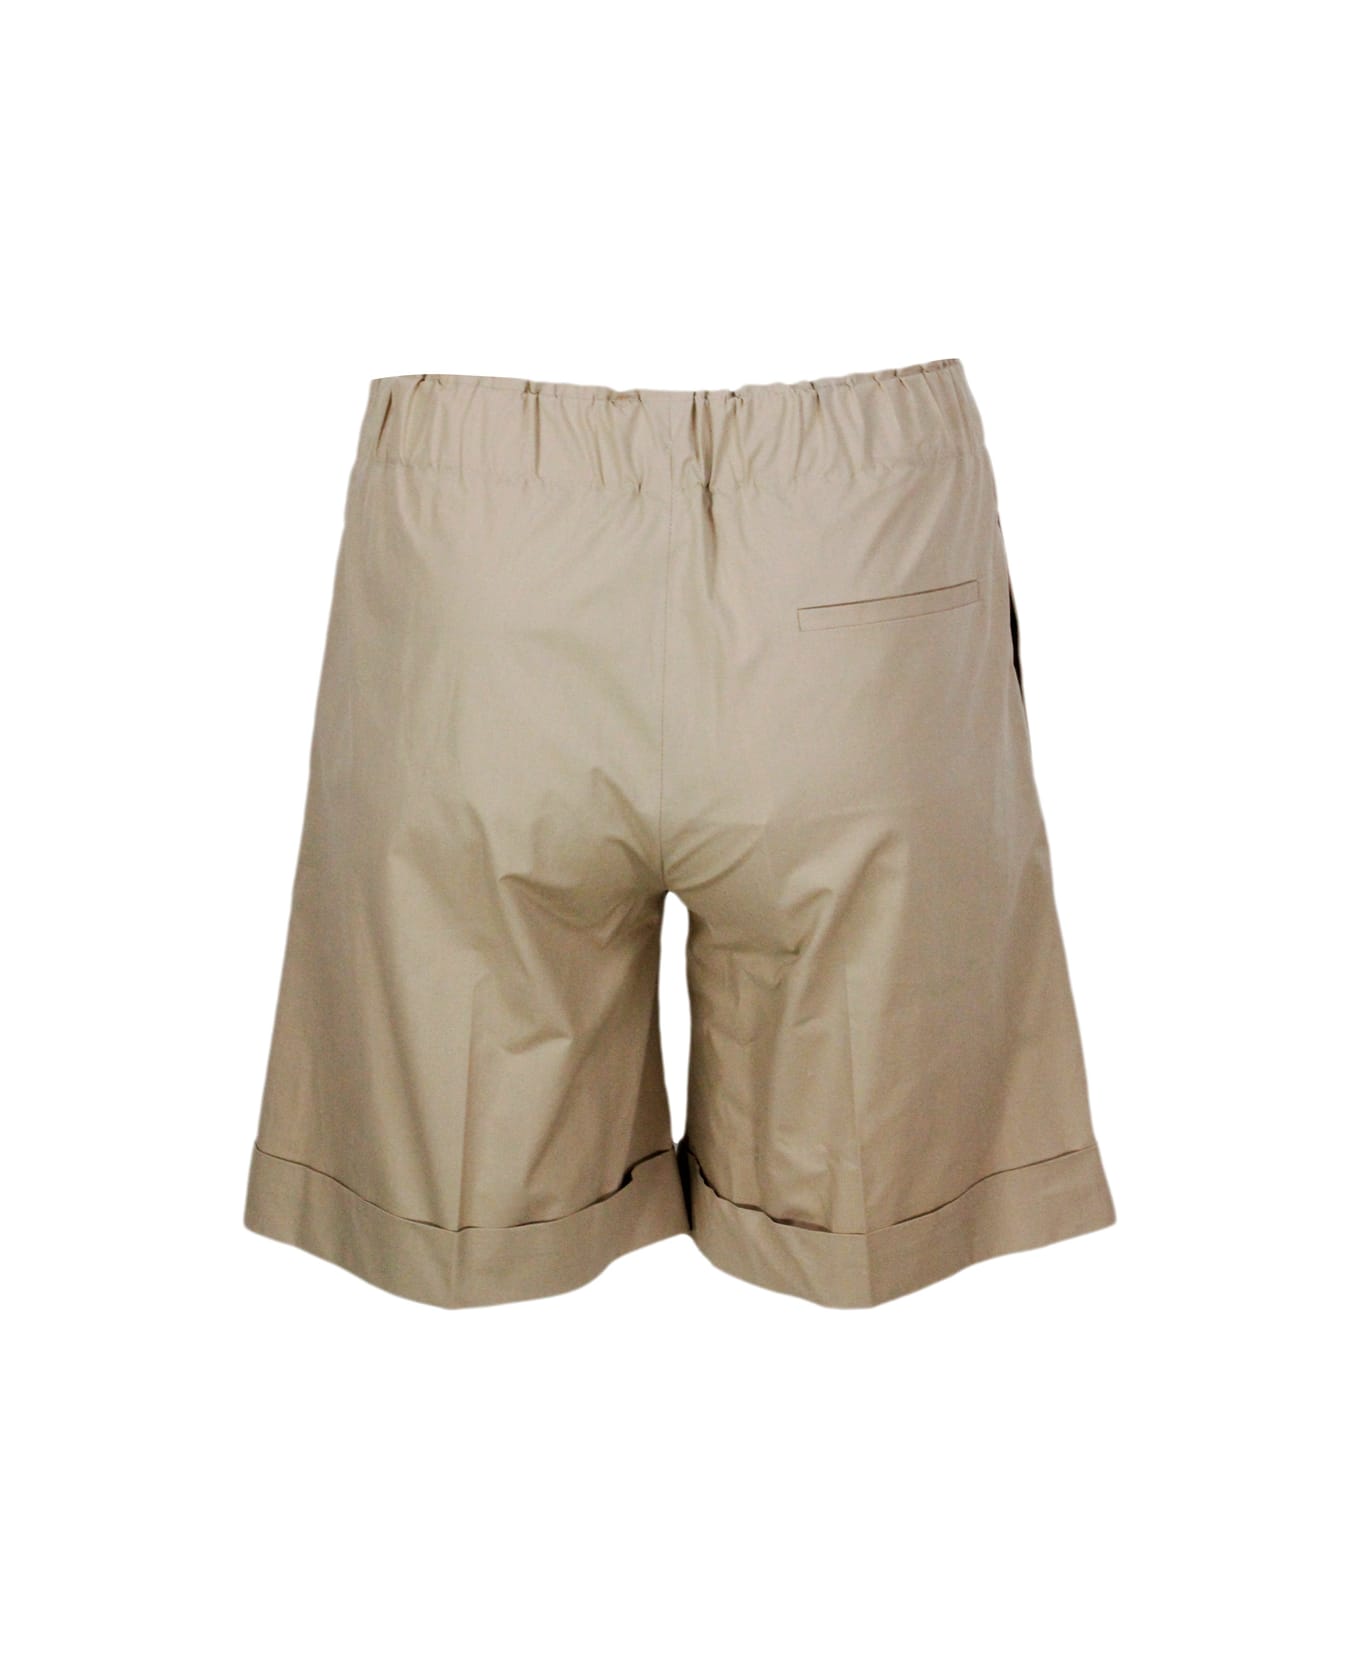 Antonelli Bermuda Shorts With Elasticated Waist And Welt Pockets With Pleats And Turn-up At The Bottom Made Of Stretch Cotton - Beige